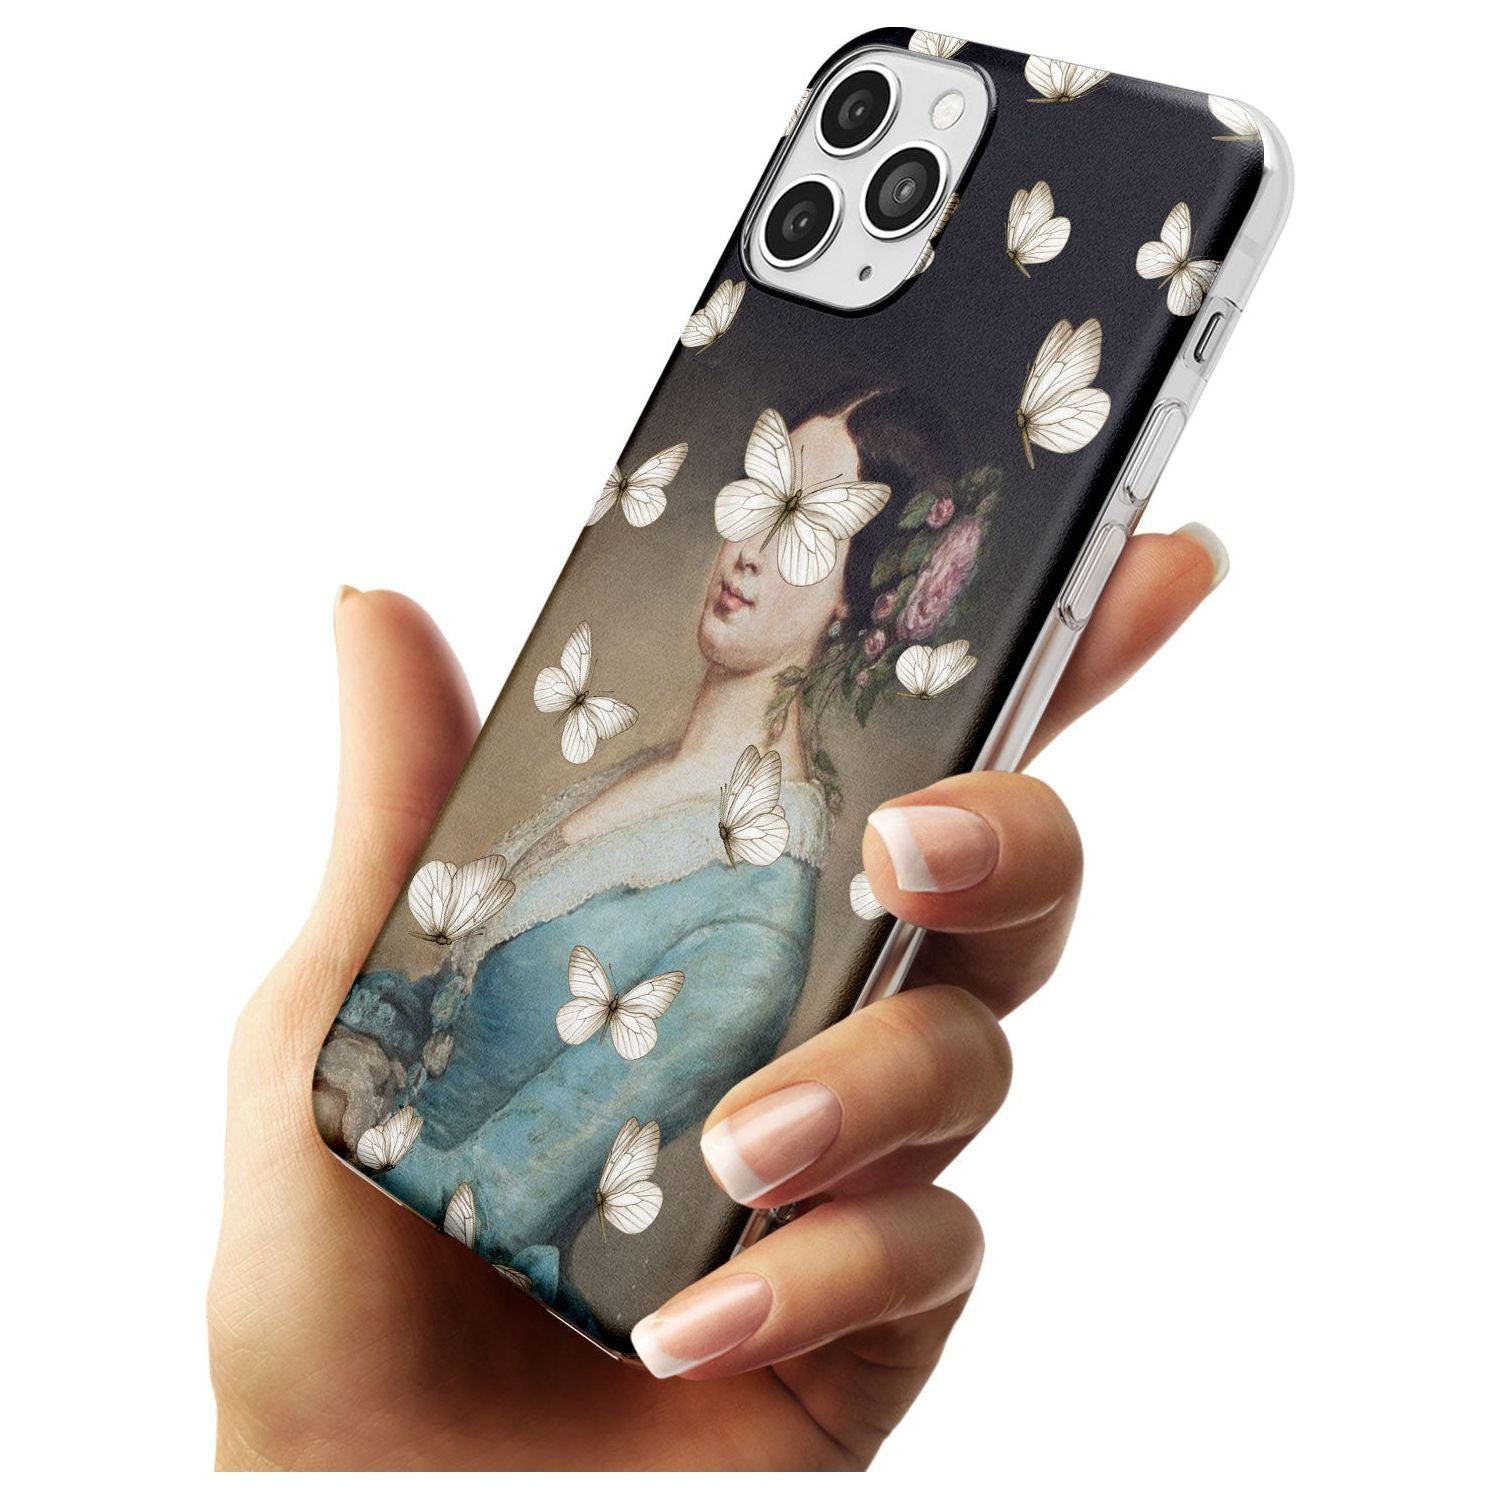 BUTTERFLY BEAUTY Black Impact Phone Case for iPhone 11 Pro Max